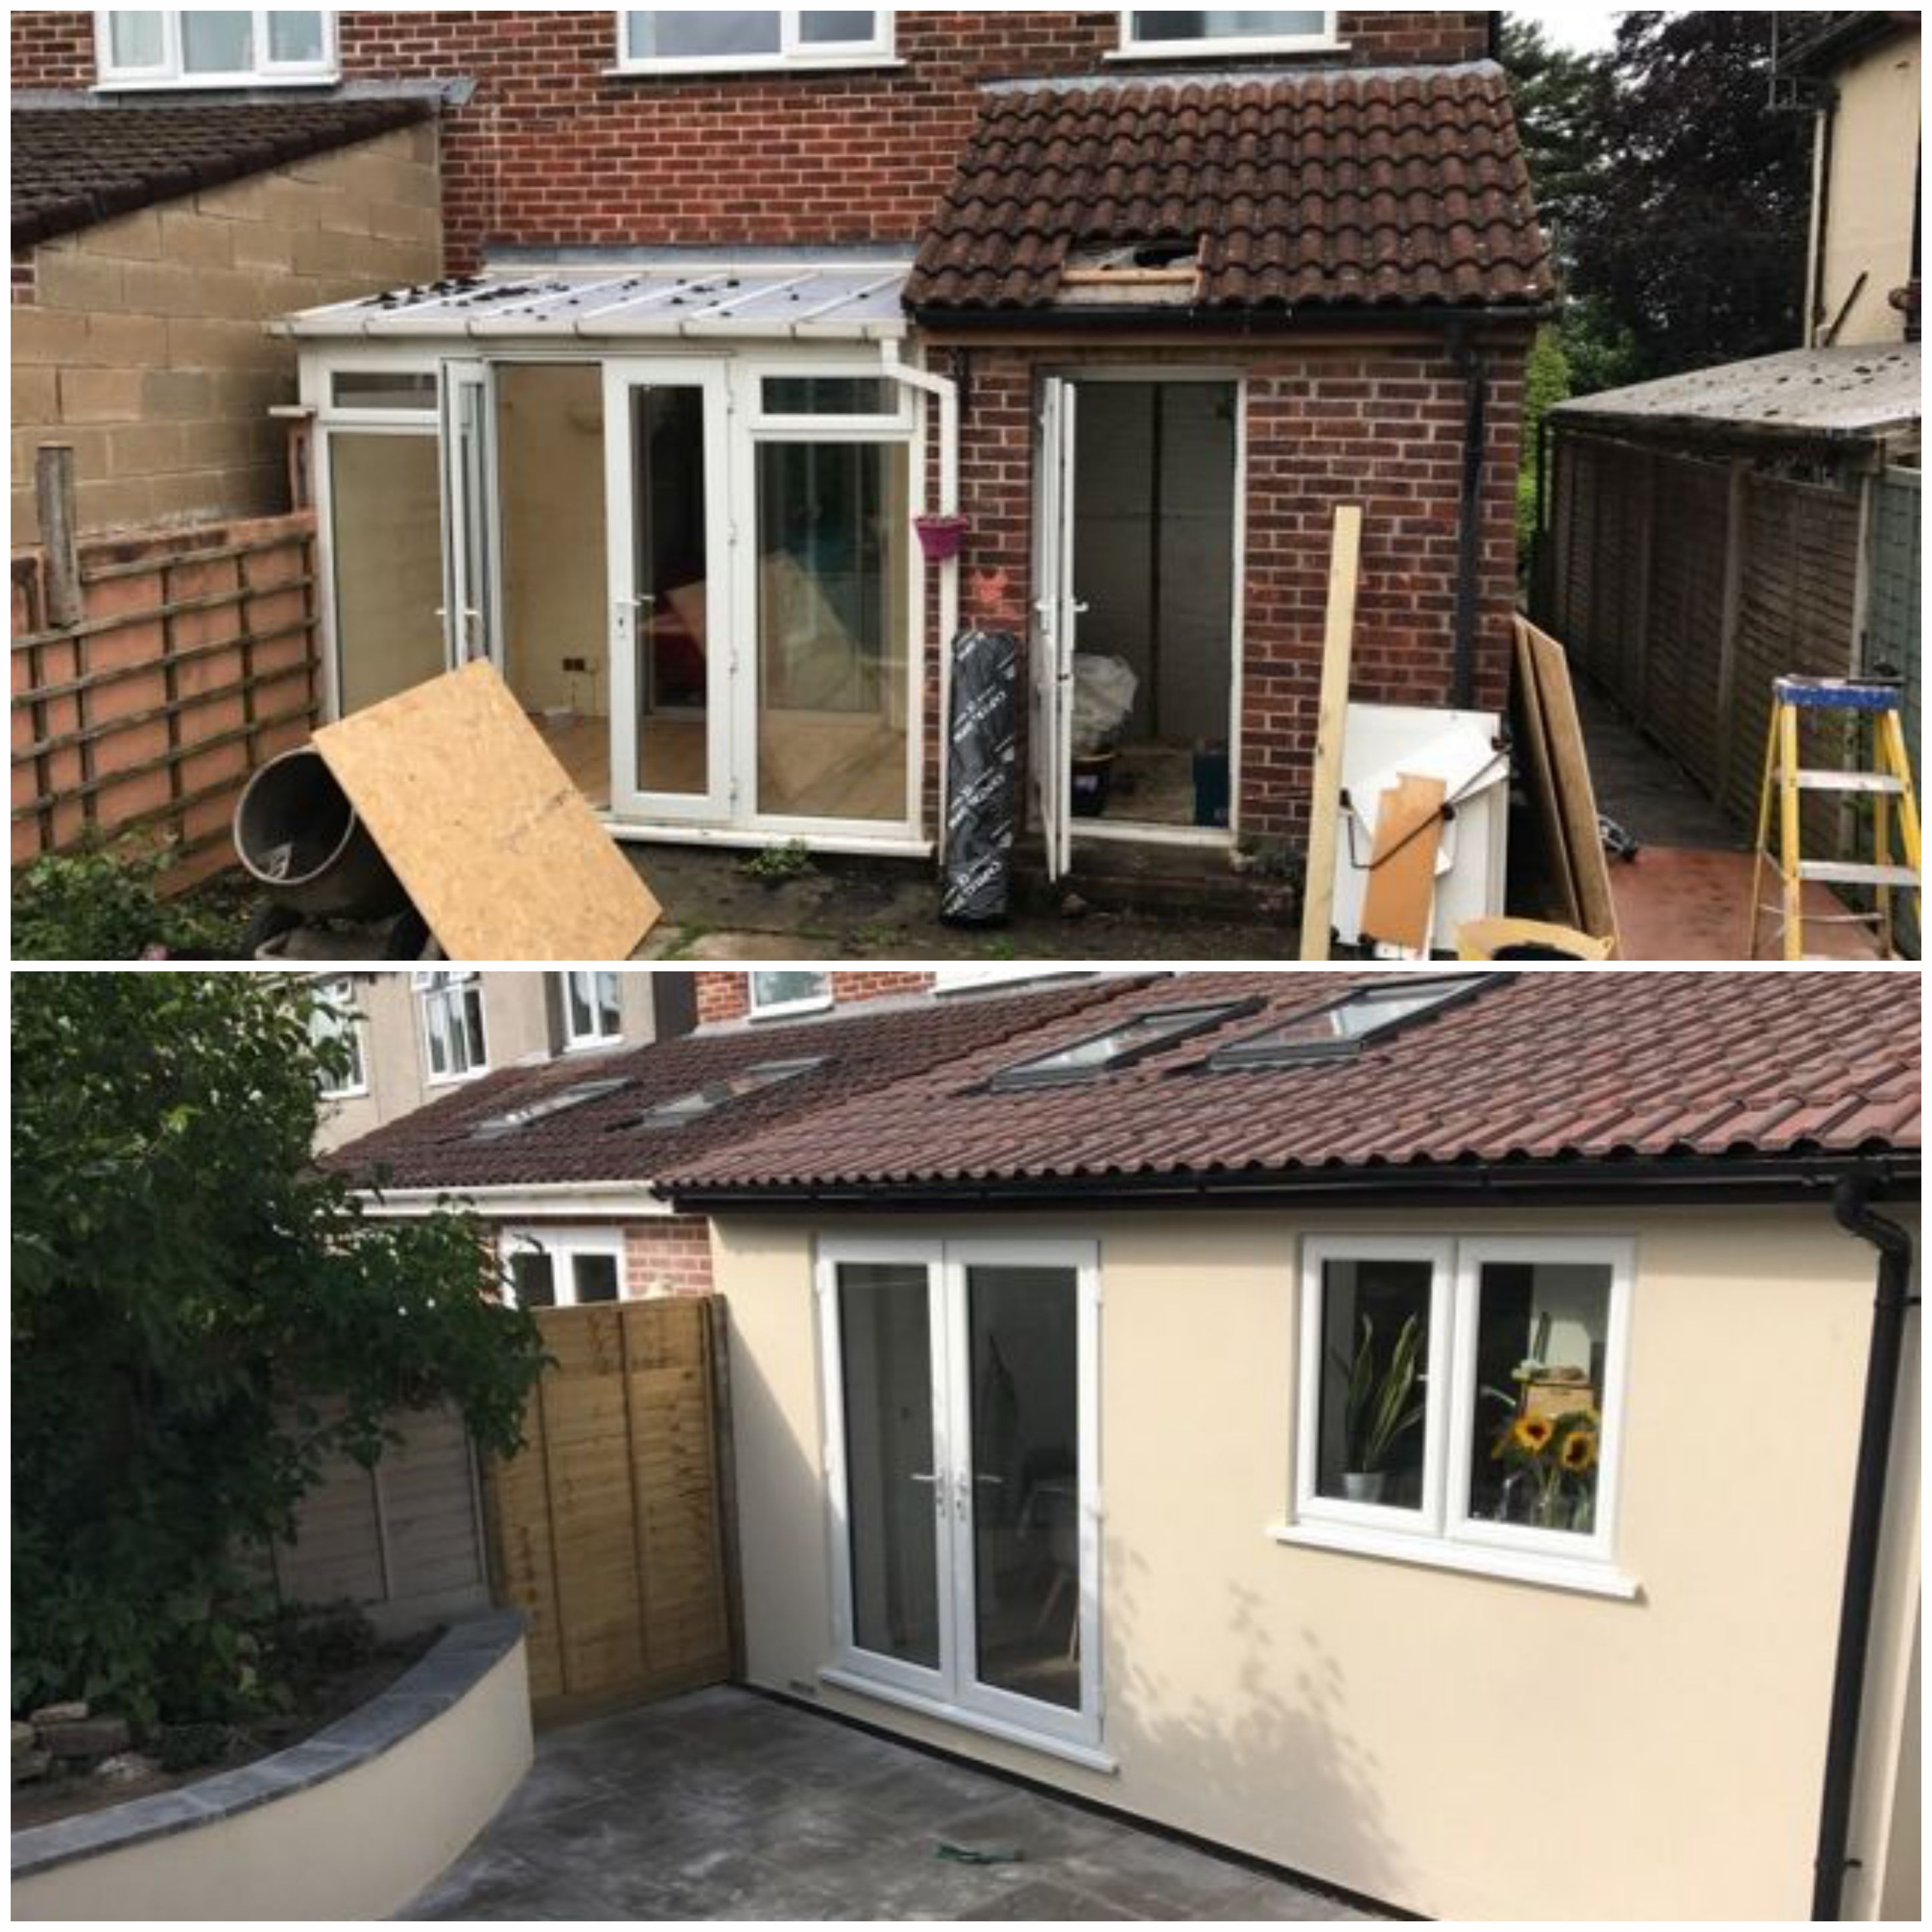 Rear extension with kitchen and new patio with retaining garden wall